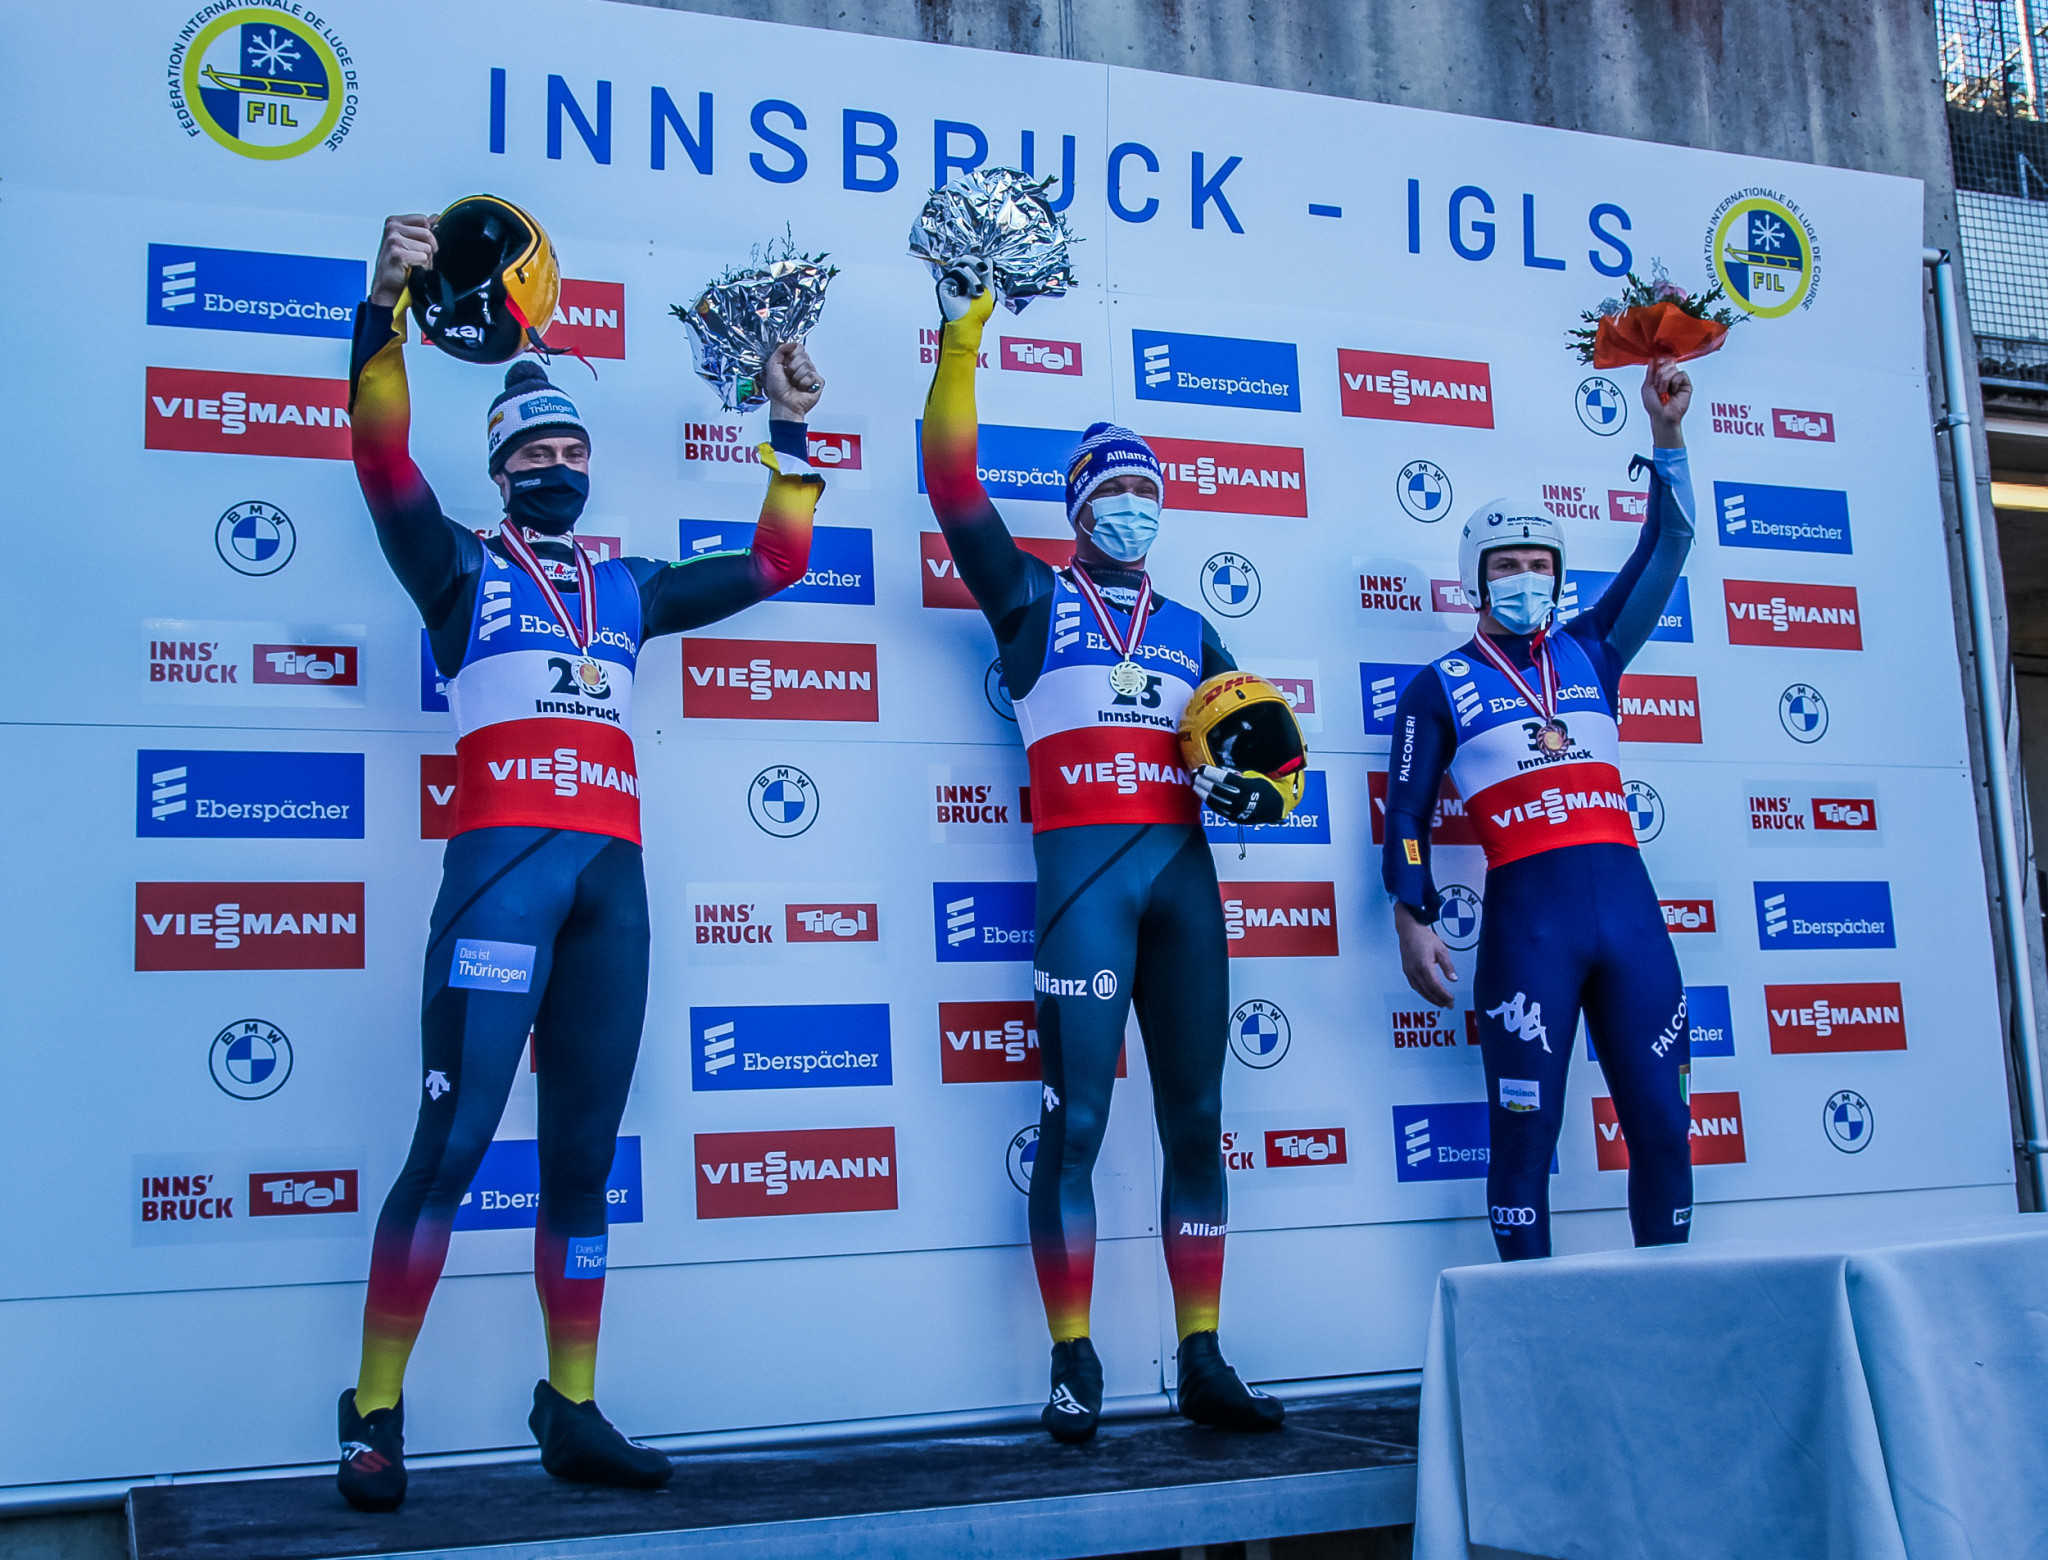 Felix Loch produced a dominant display on his way to victory in the men's singles at the FIL World Cup opener in Innsbruck-Igls ©FIL